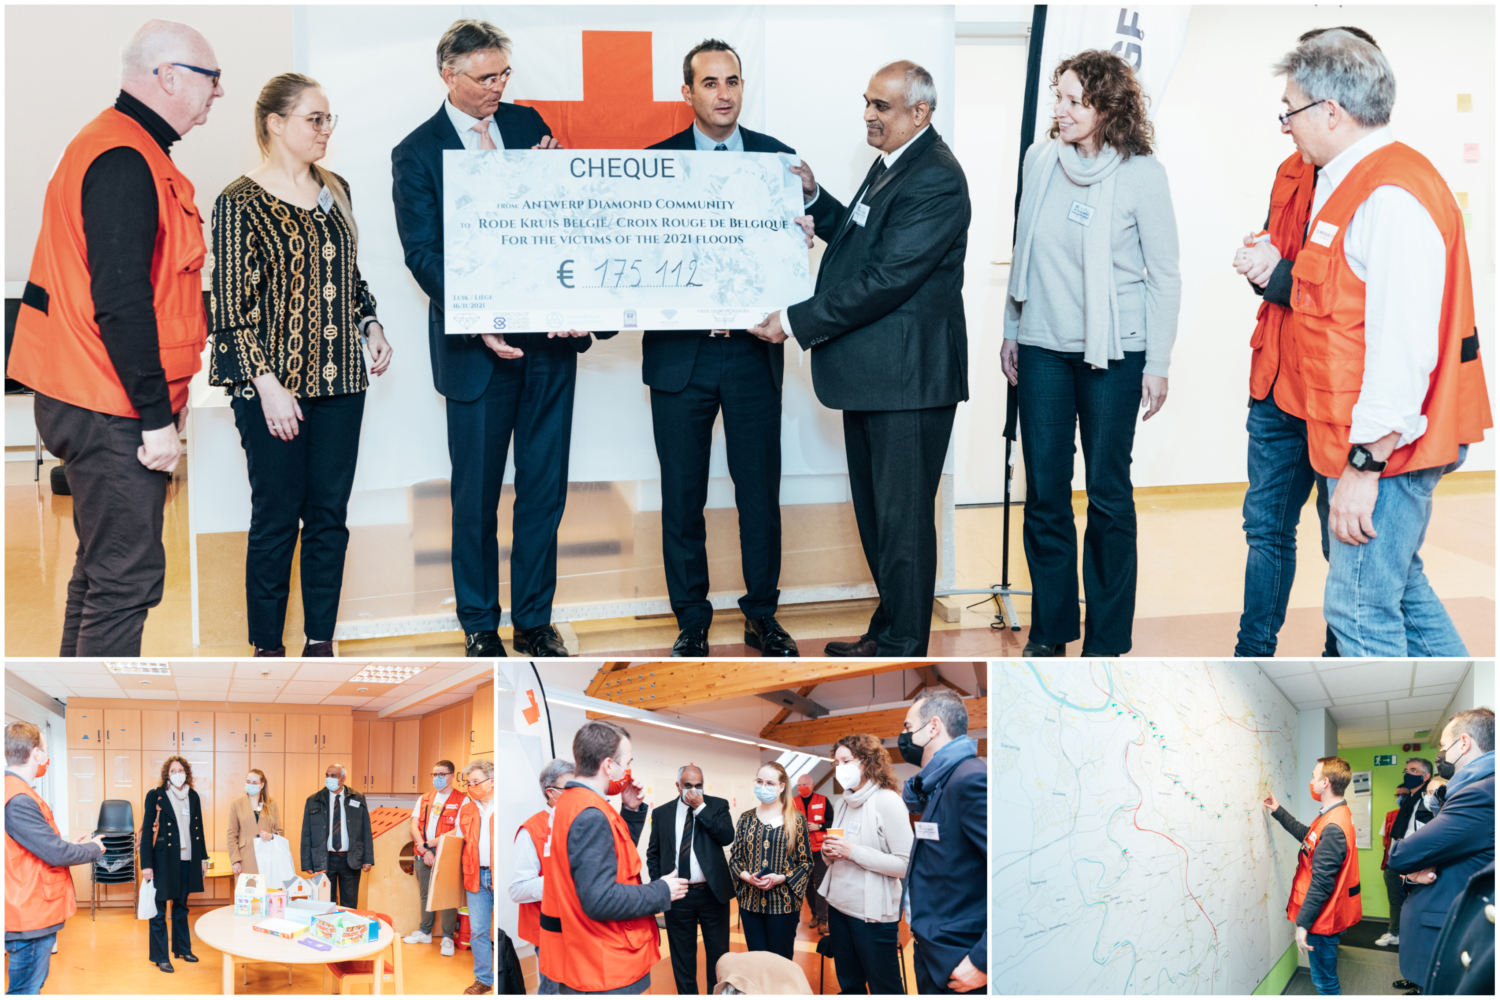 Antwerp Diamond Community presents a cheque of €175.112 to the Belgian Red Cross.